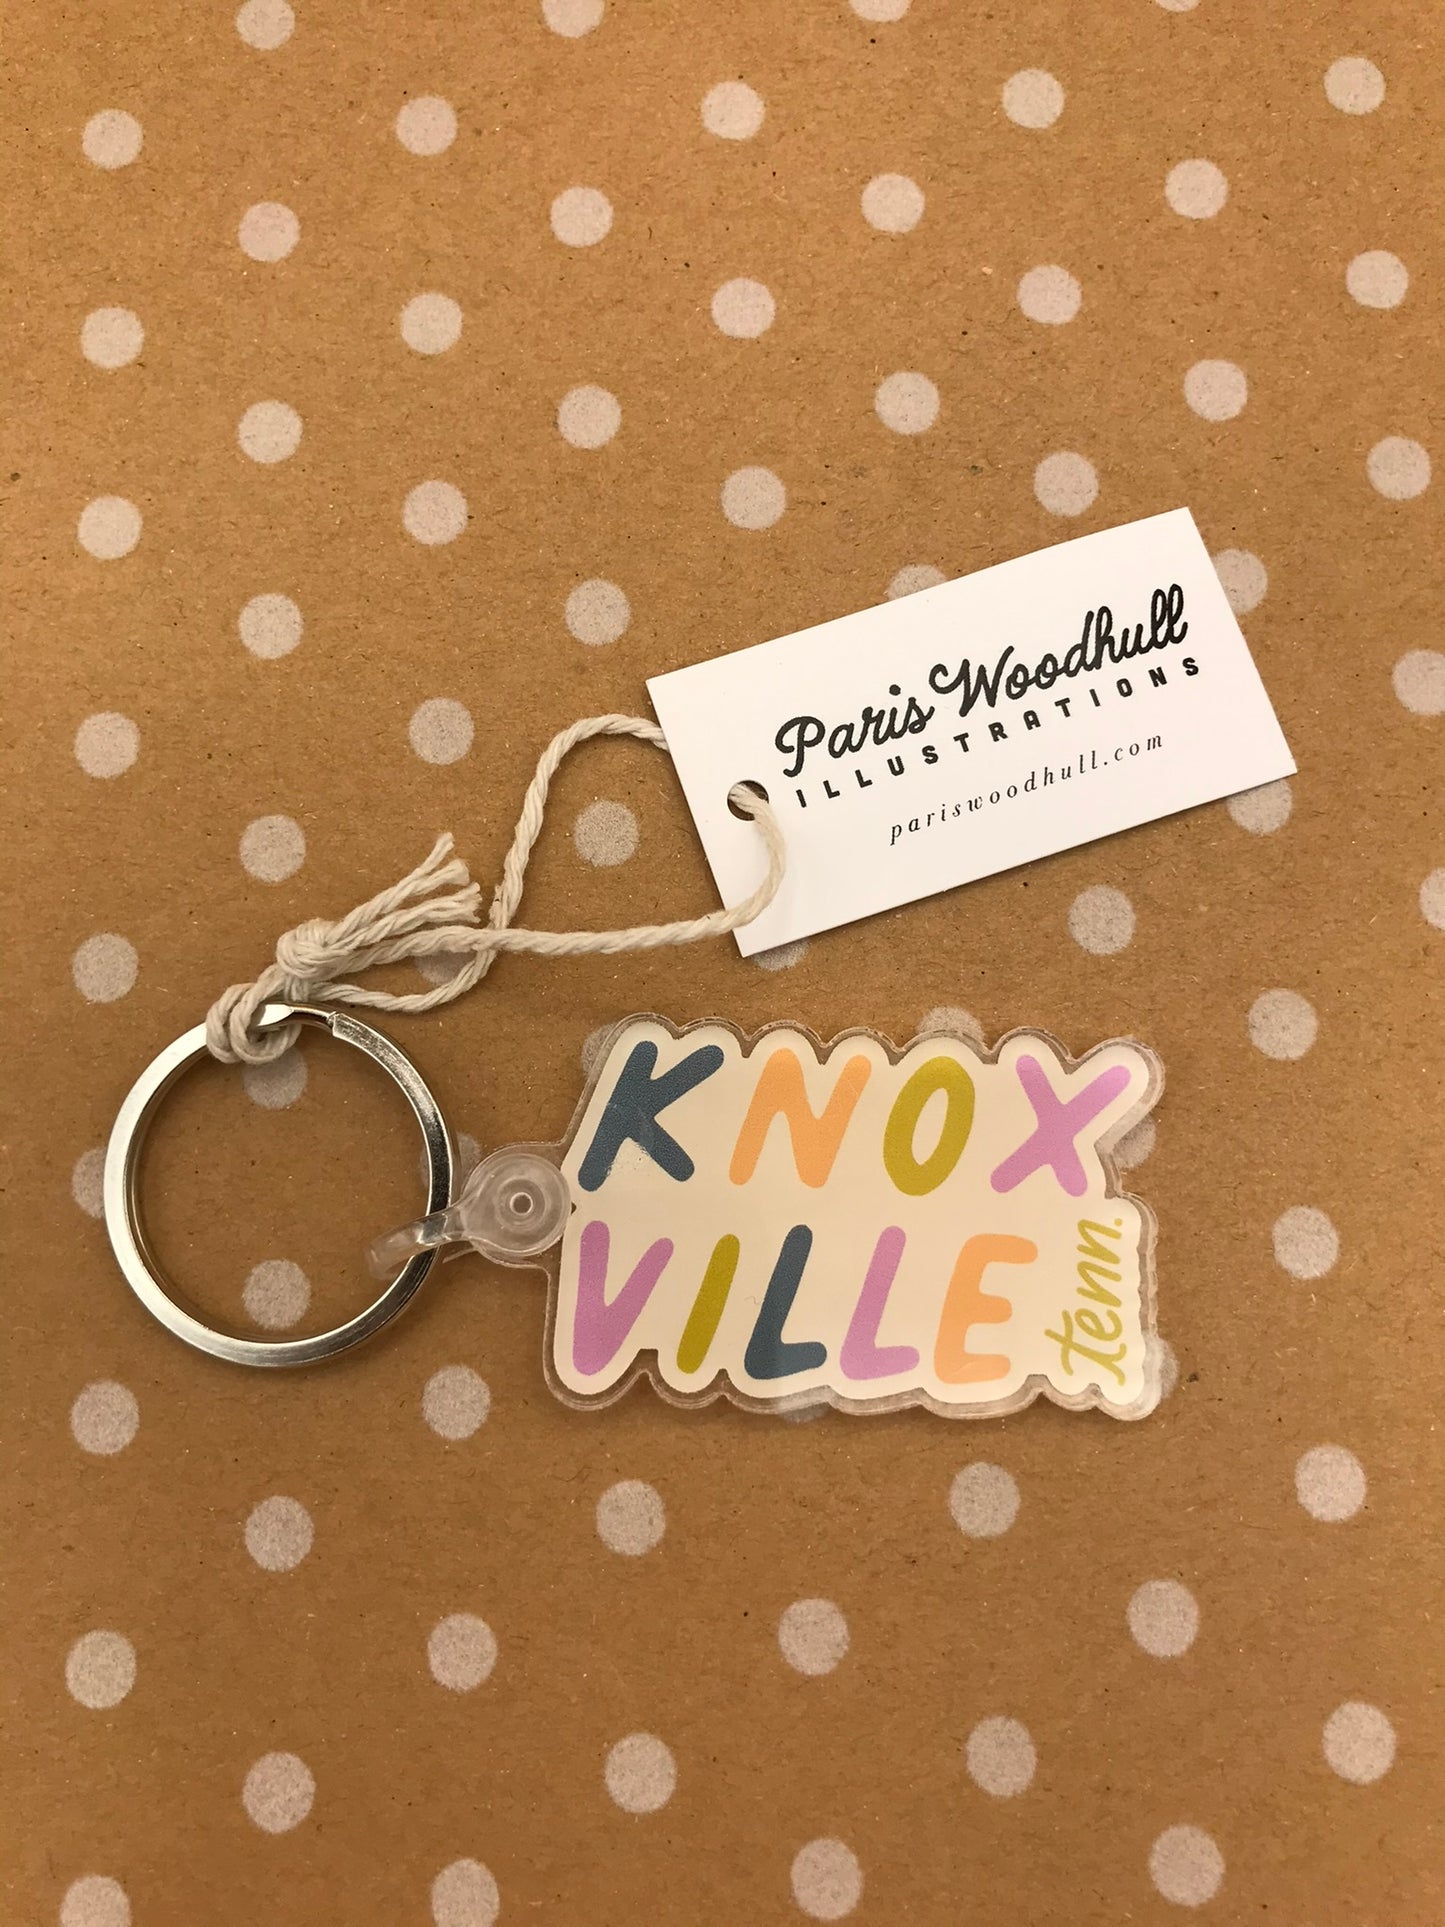 Knoxville Tenn Keychain by Paris Woodhull